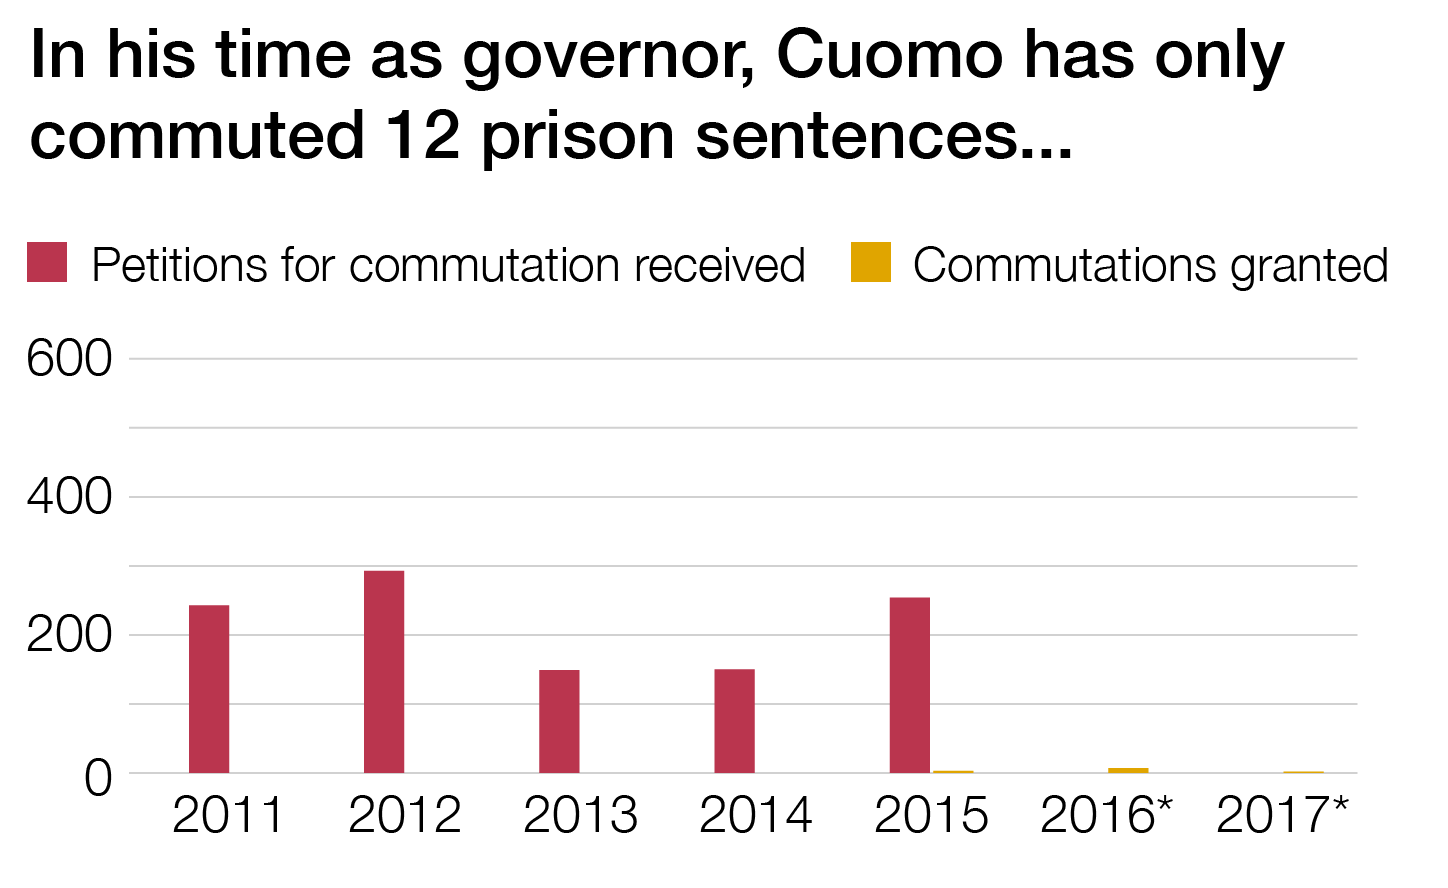 A graph displaying the numbers of petitions for clemency received versus commutations granted from 2011-2017. There are over a hundred applications in each year from 2011-2015. Zero commutations were issued from 2011-2014. In 2015 and 2016, a very small number were granted.  Data for clemency applications was not available in 2016 and 2017.